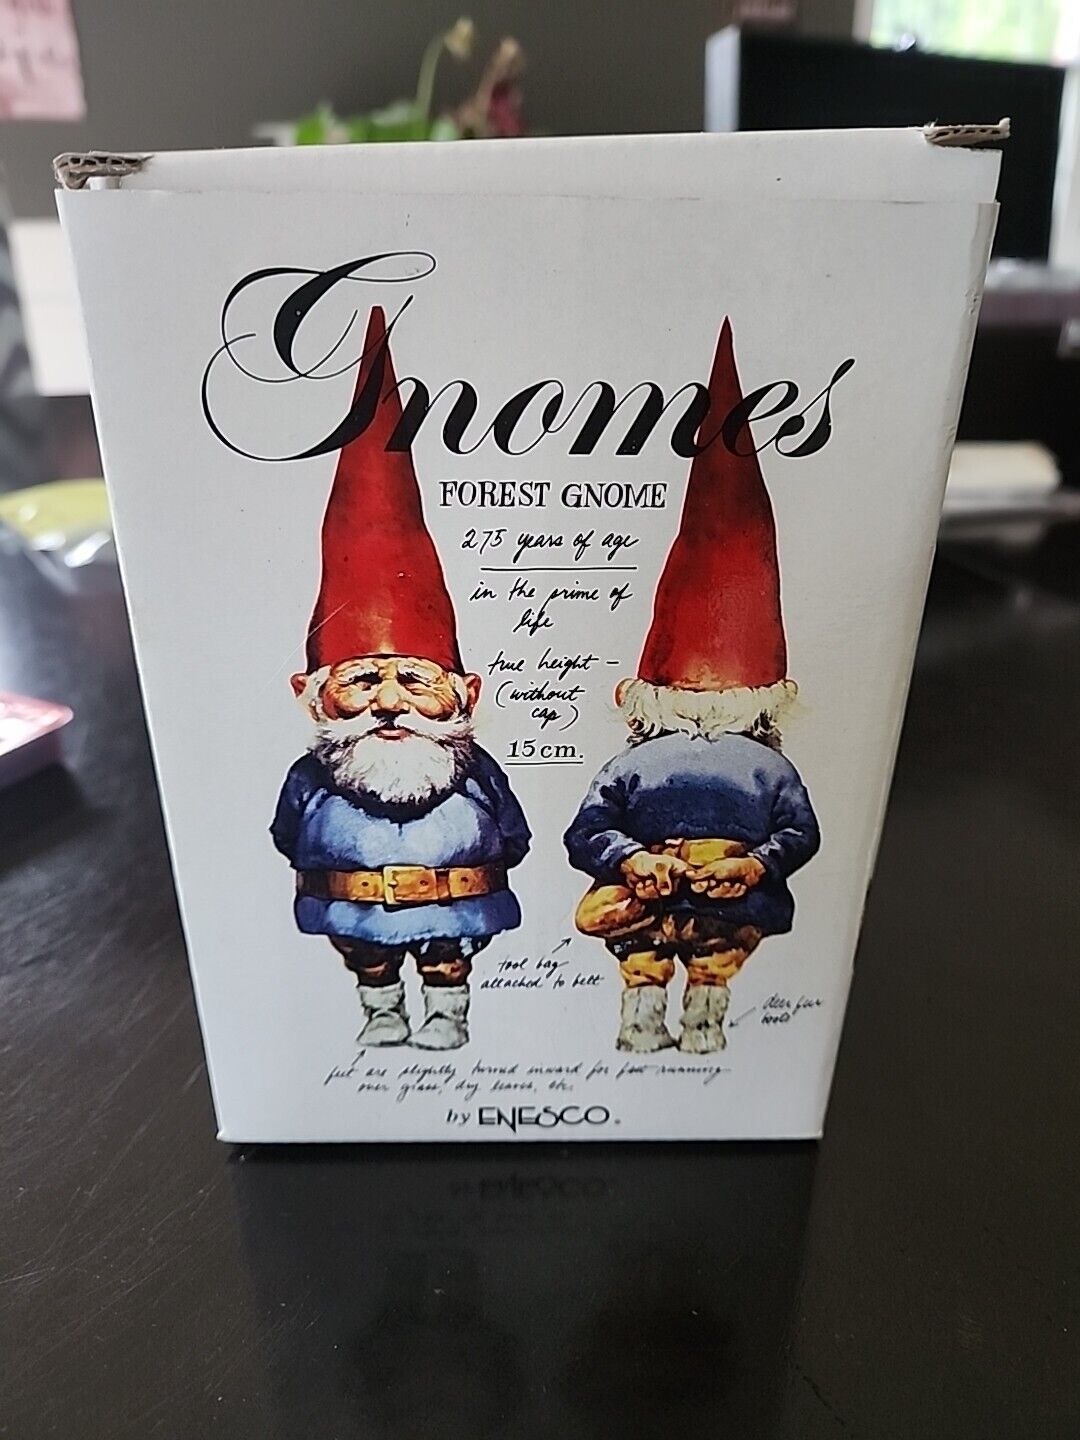 1993 Enesco Gnomes Klaus Wickl Richard and Rosemary in Box w/ Certificate 323632